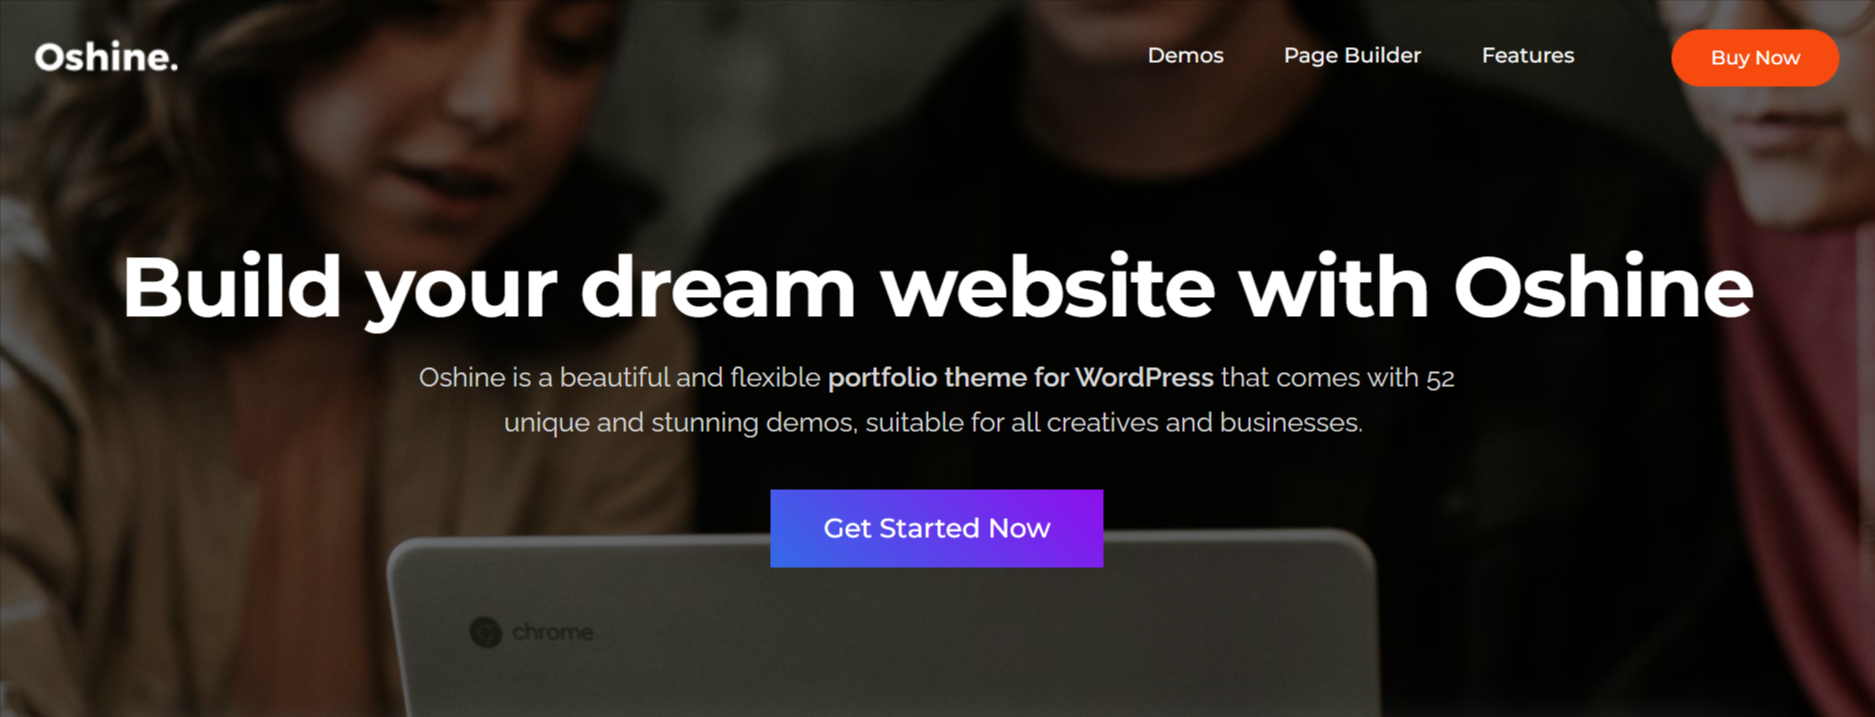 Oshine - WordPress Themes for Artists That Will Amaze You